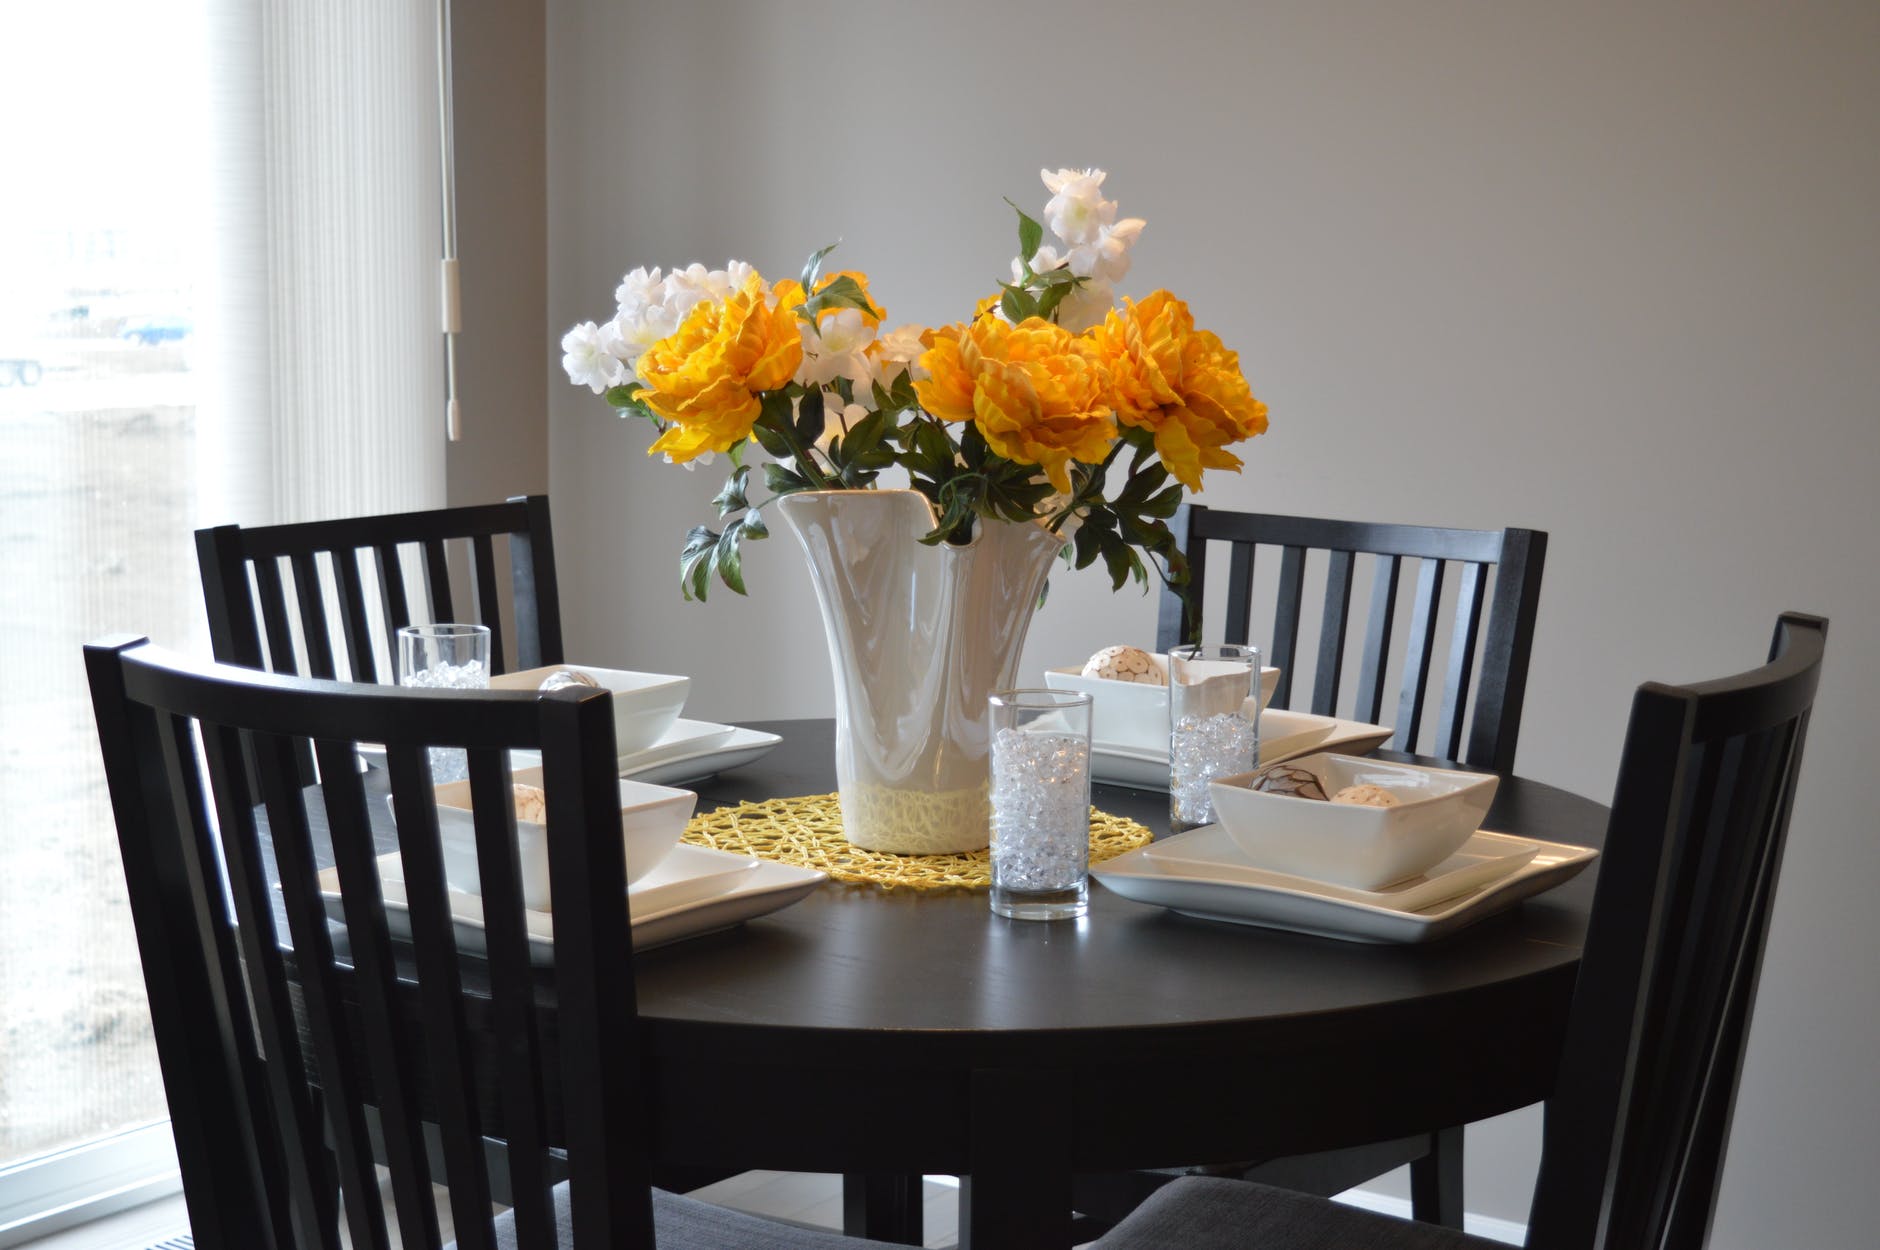 How To Decorate A Dining Table